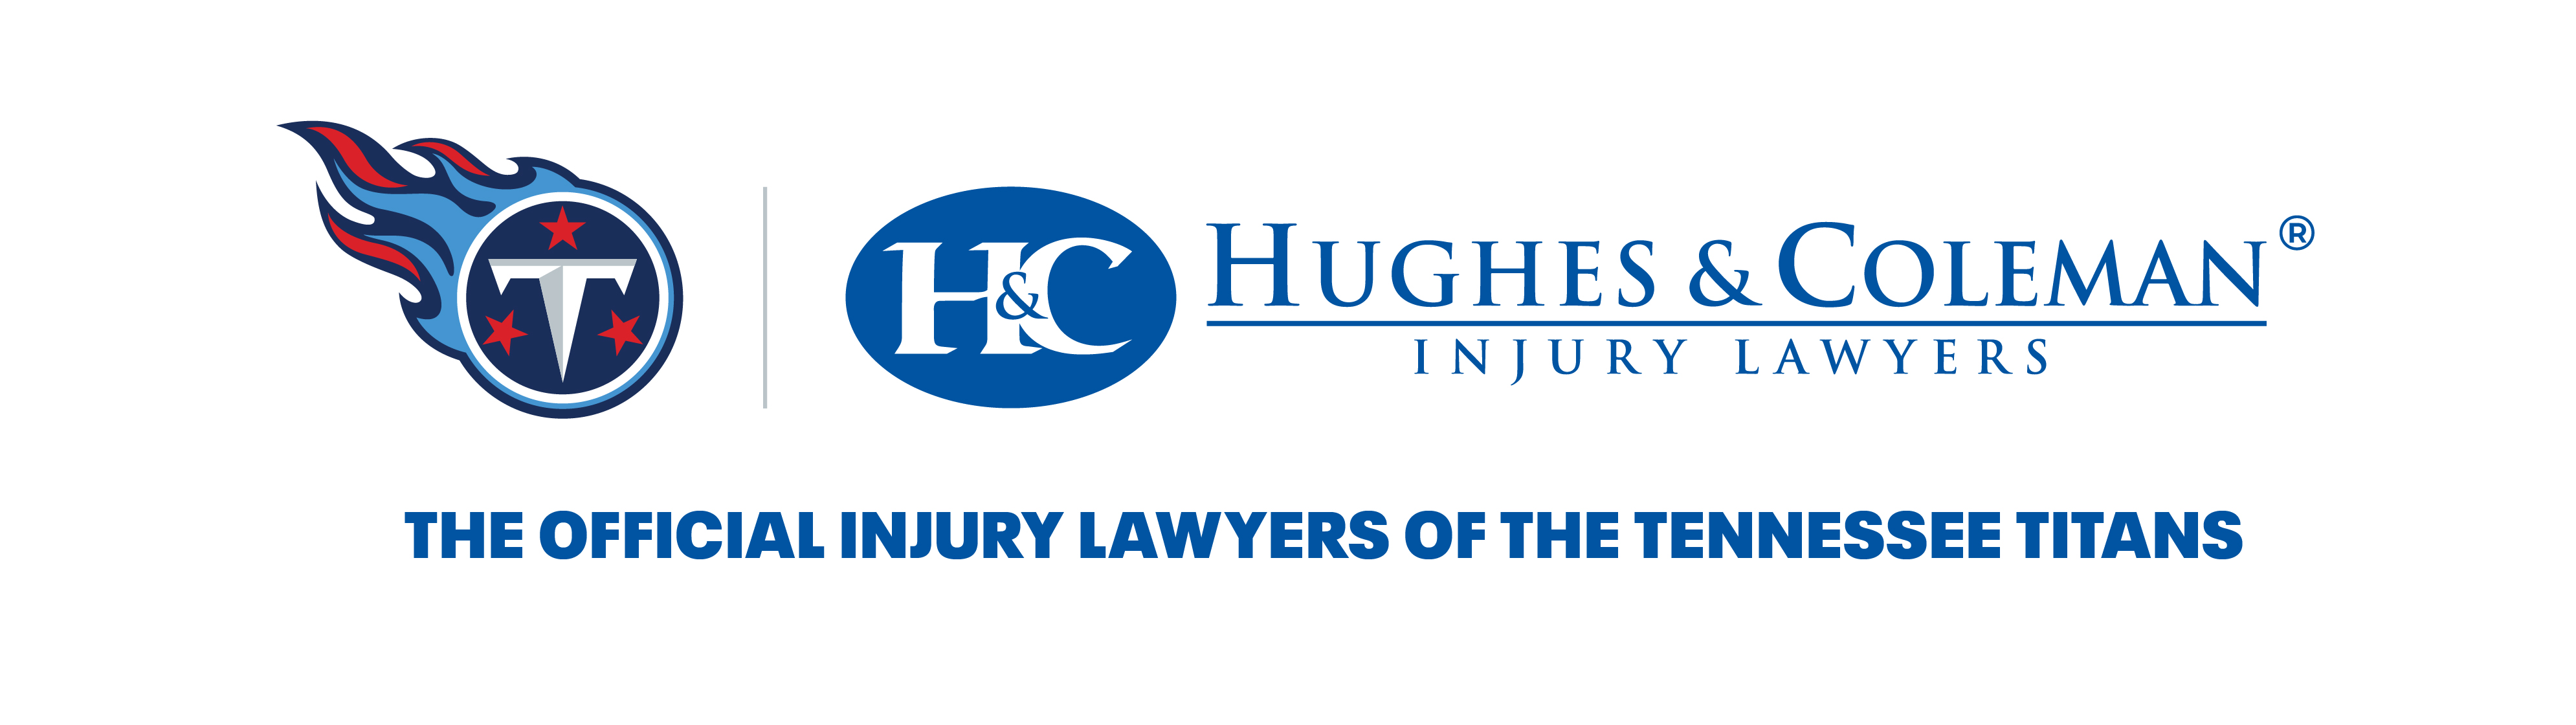 Hughes & Coleman - The Official Injury Lawyers of the Tennessee Titans